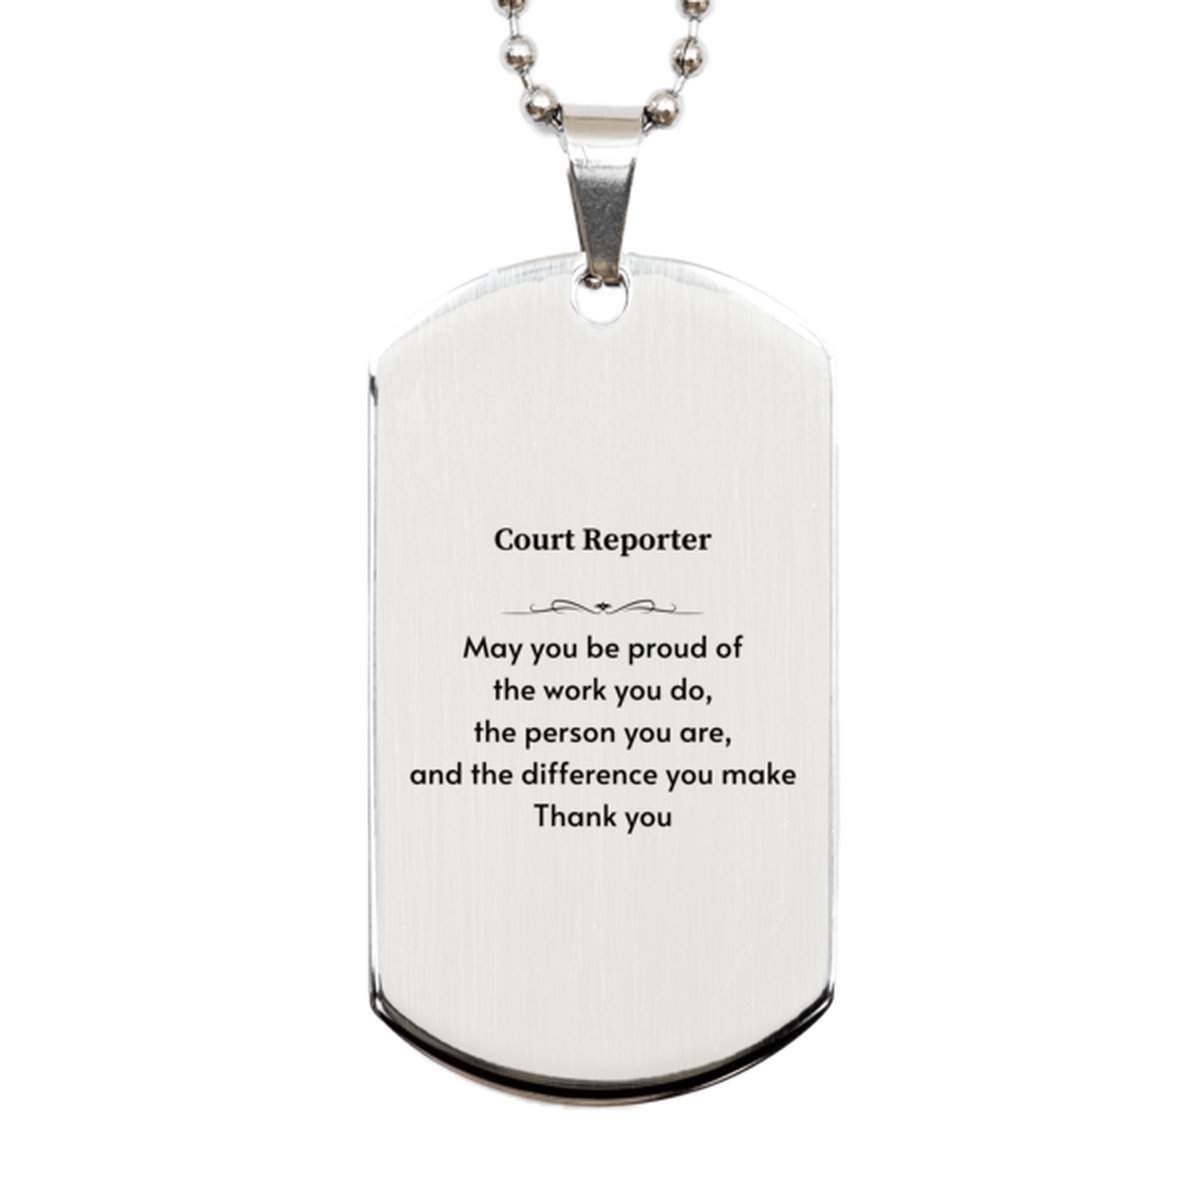 Heartwarming Silver Dog Tag Retirement Coworkers Gifts for Court Reporter, Court Reporter May You be proud of the work you do, the person you are Gifts for Boss Men Women Friends